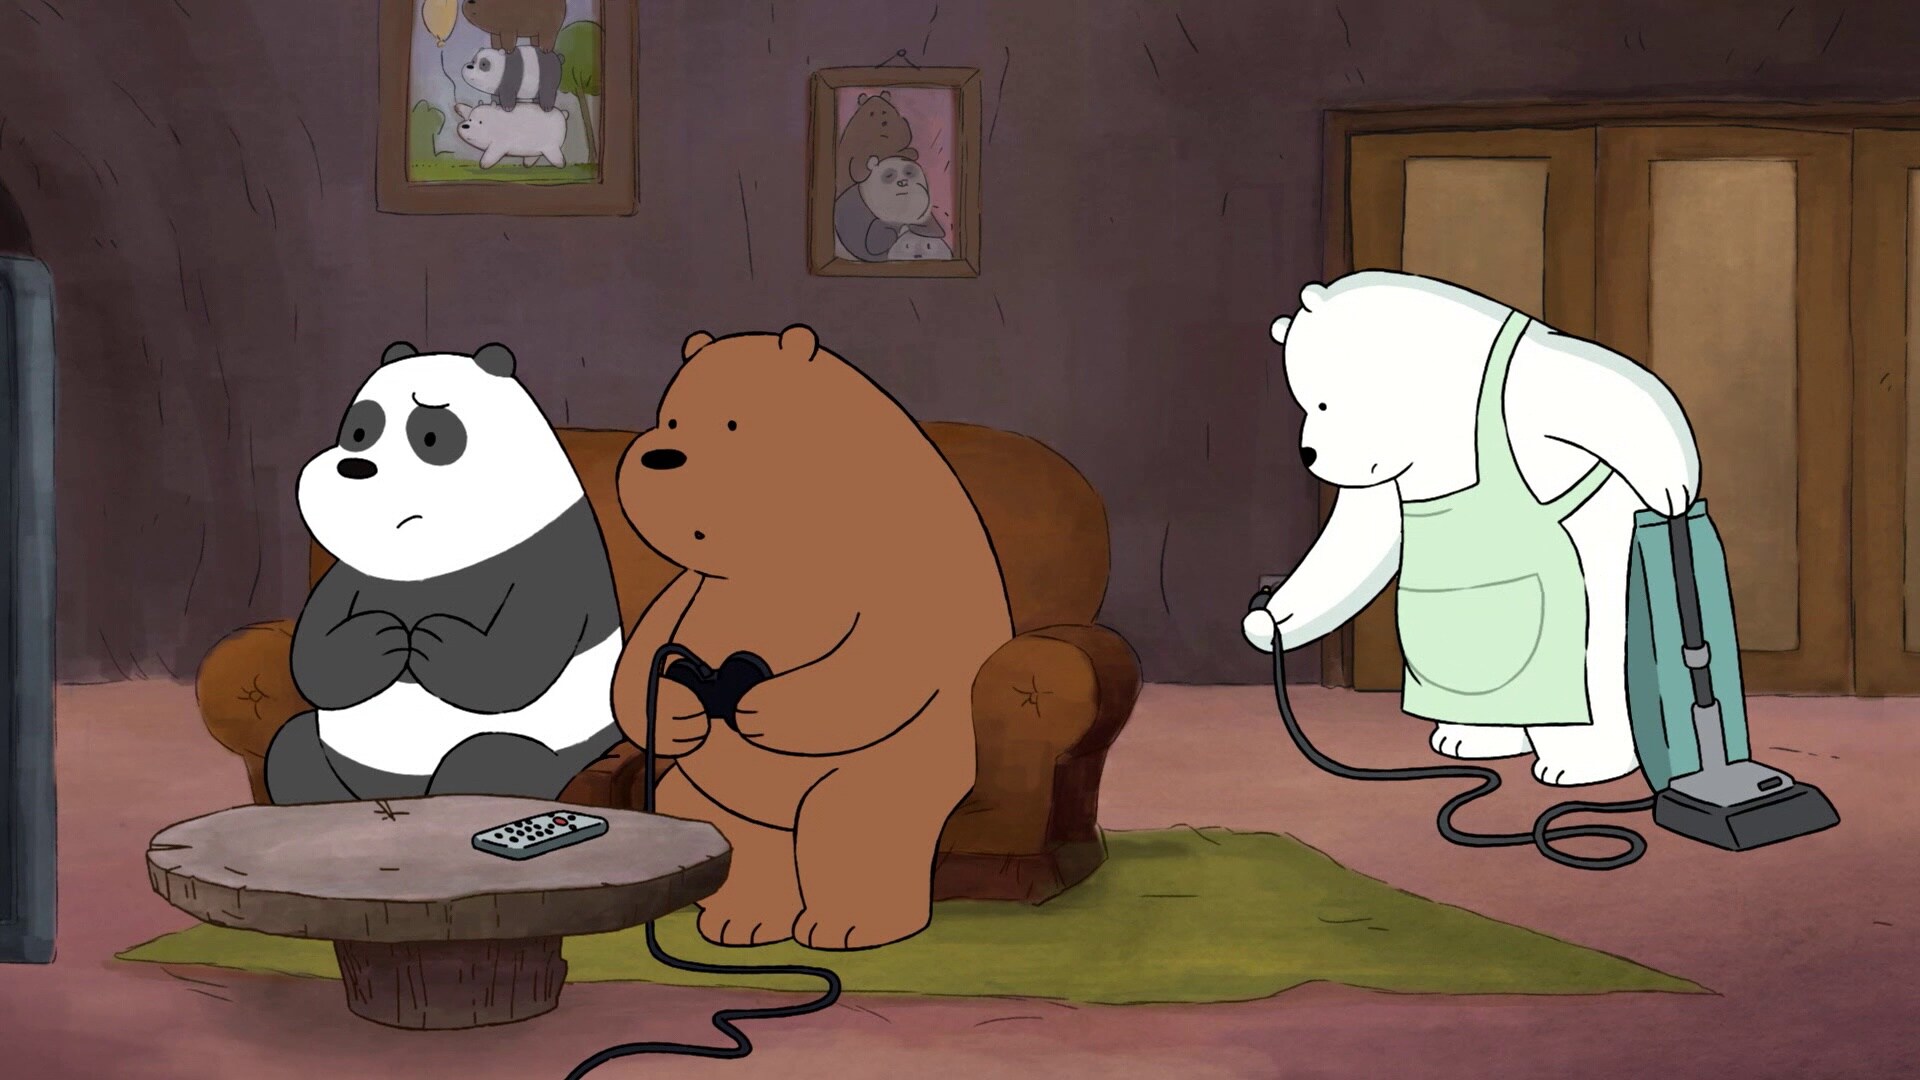 We Bare Bears, Free online games and video